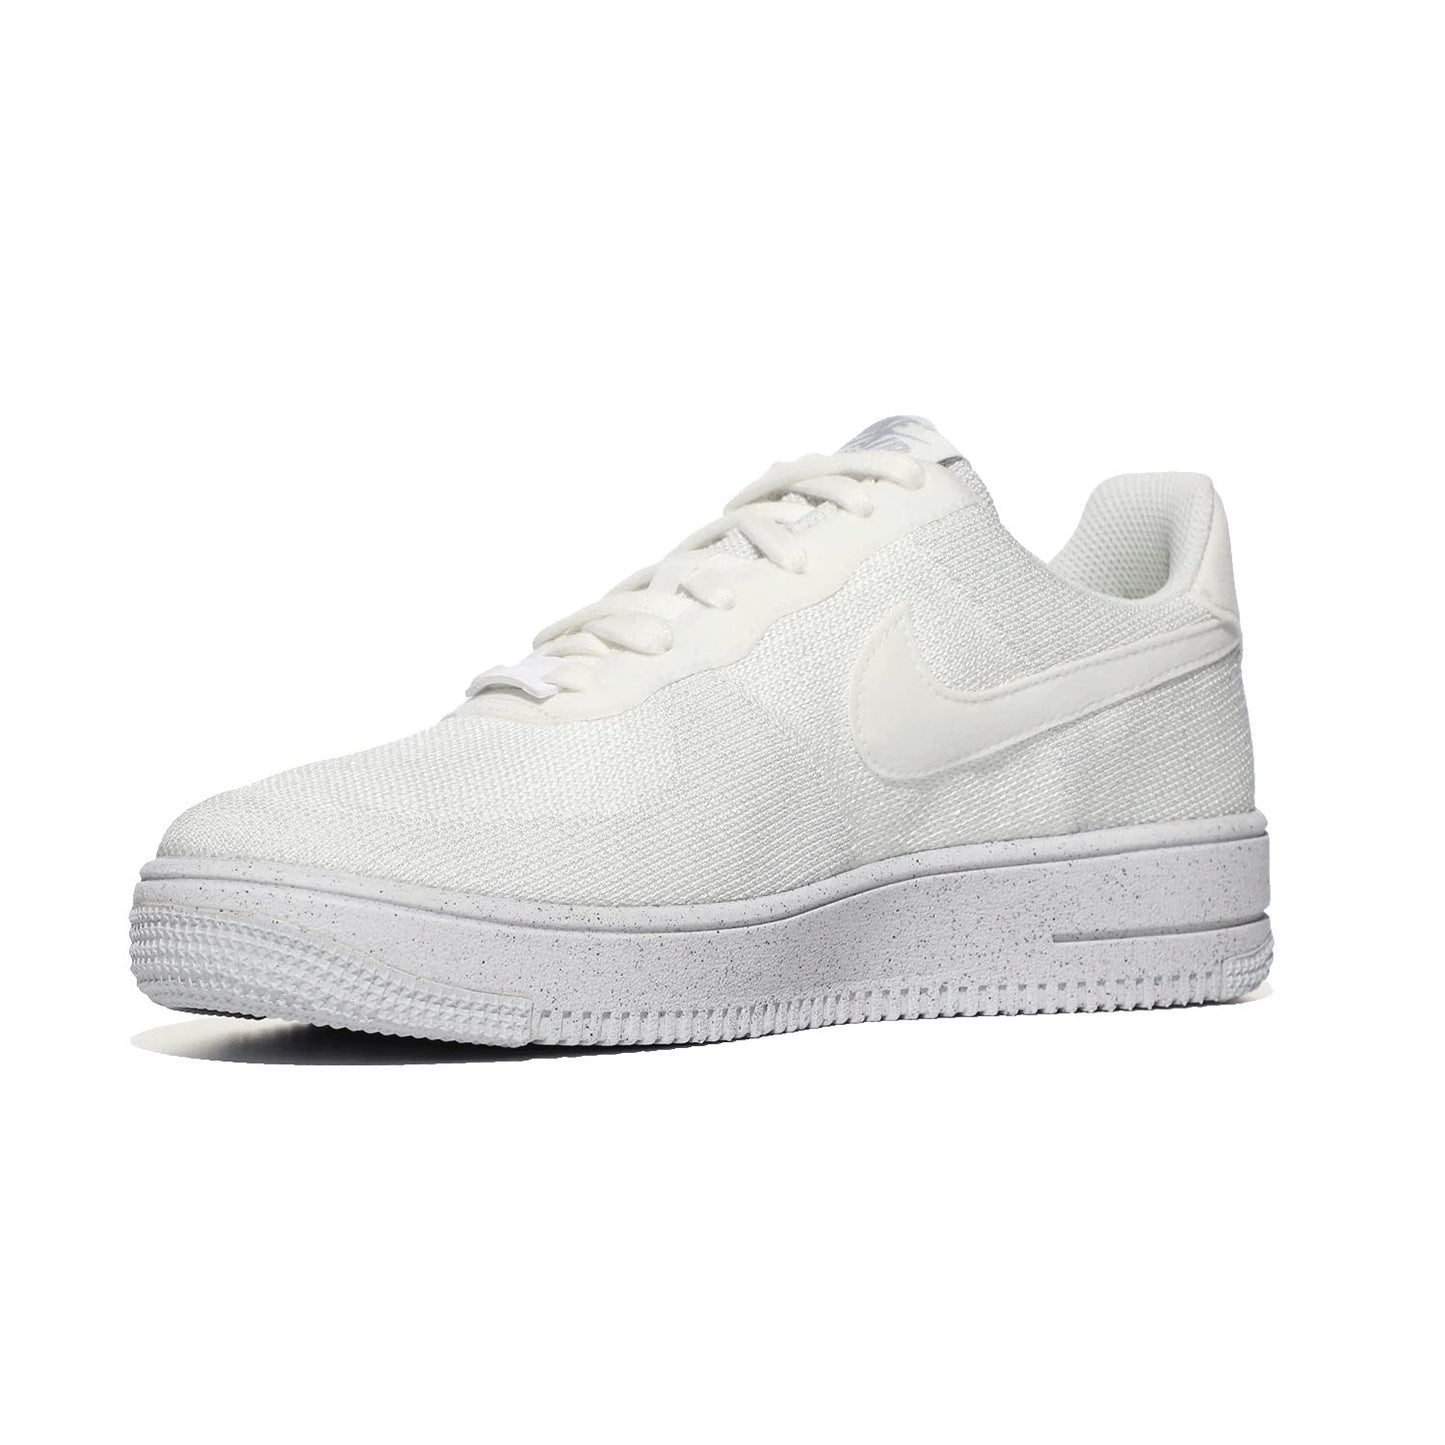 Image 2 of Air Force 1 Crater Flyknit (Big Kid)